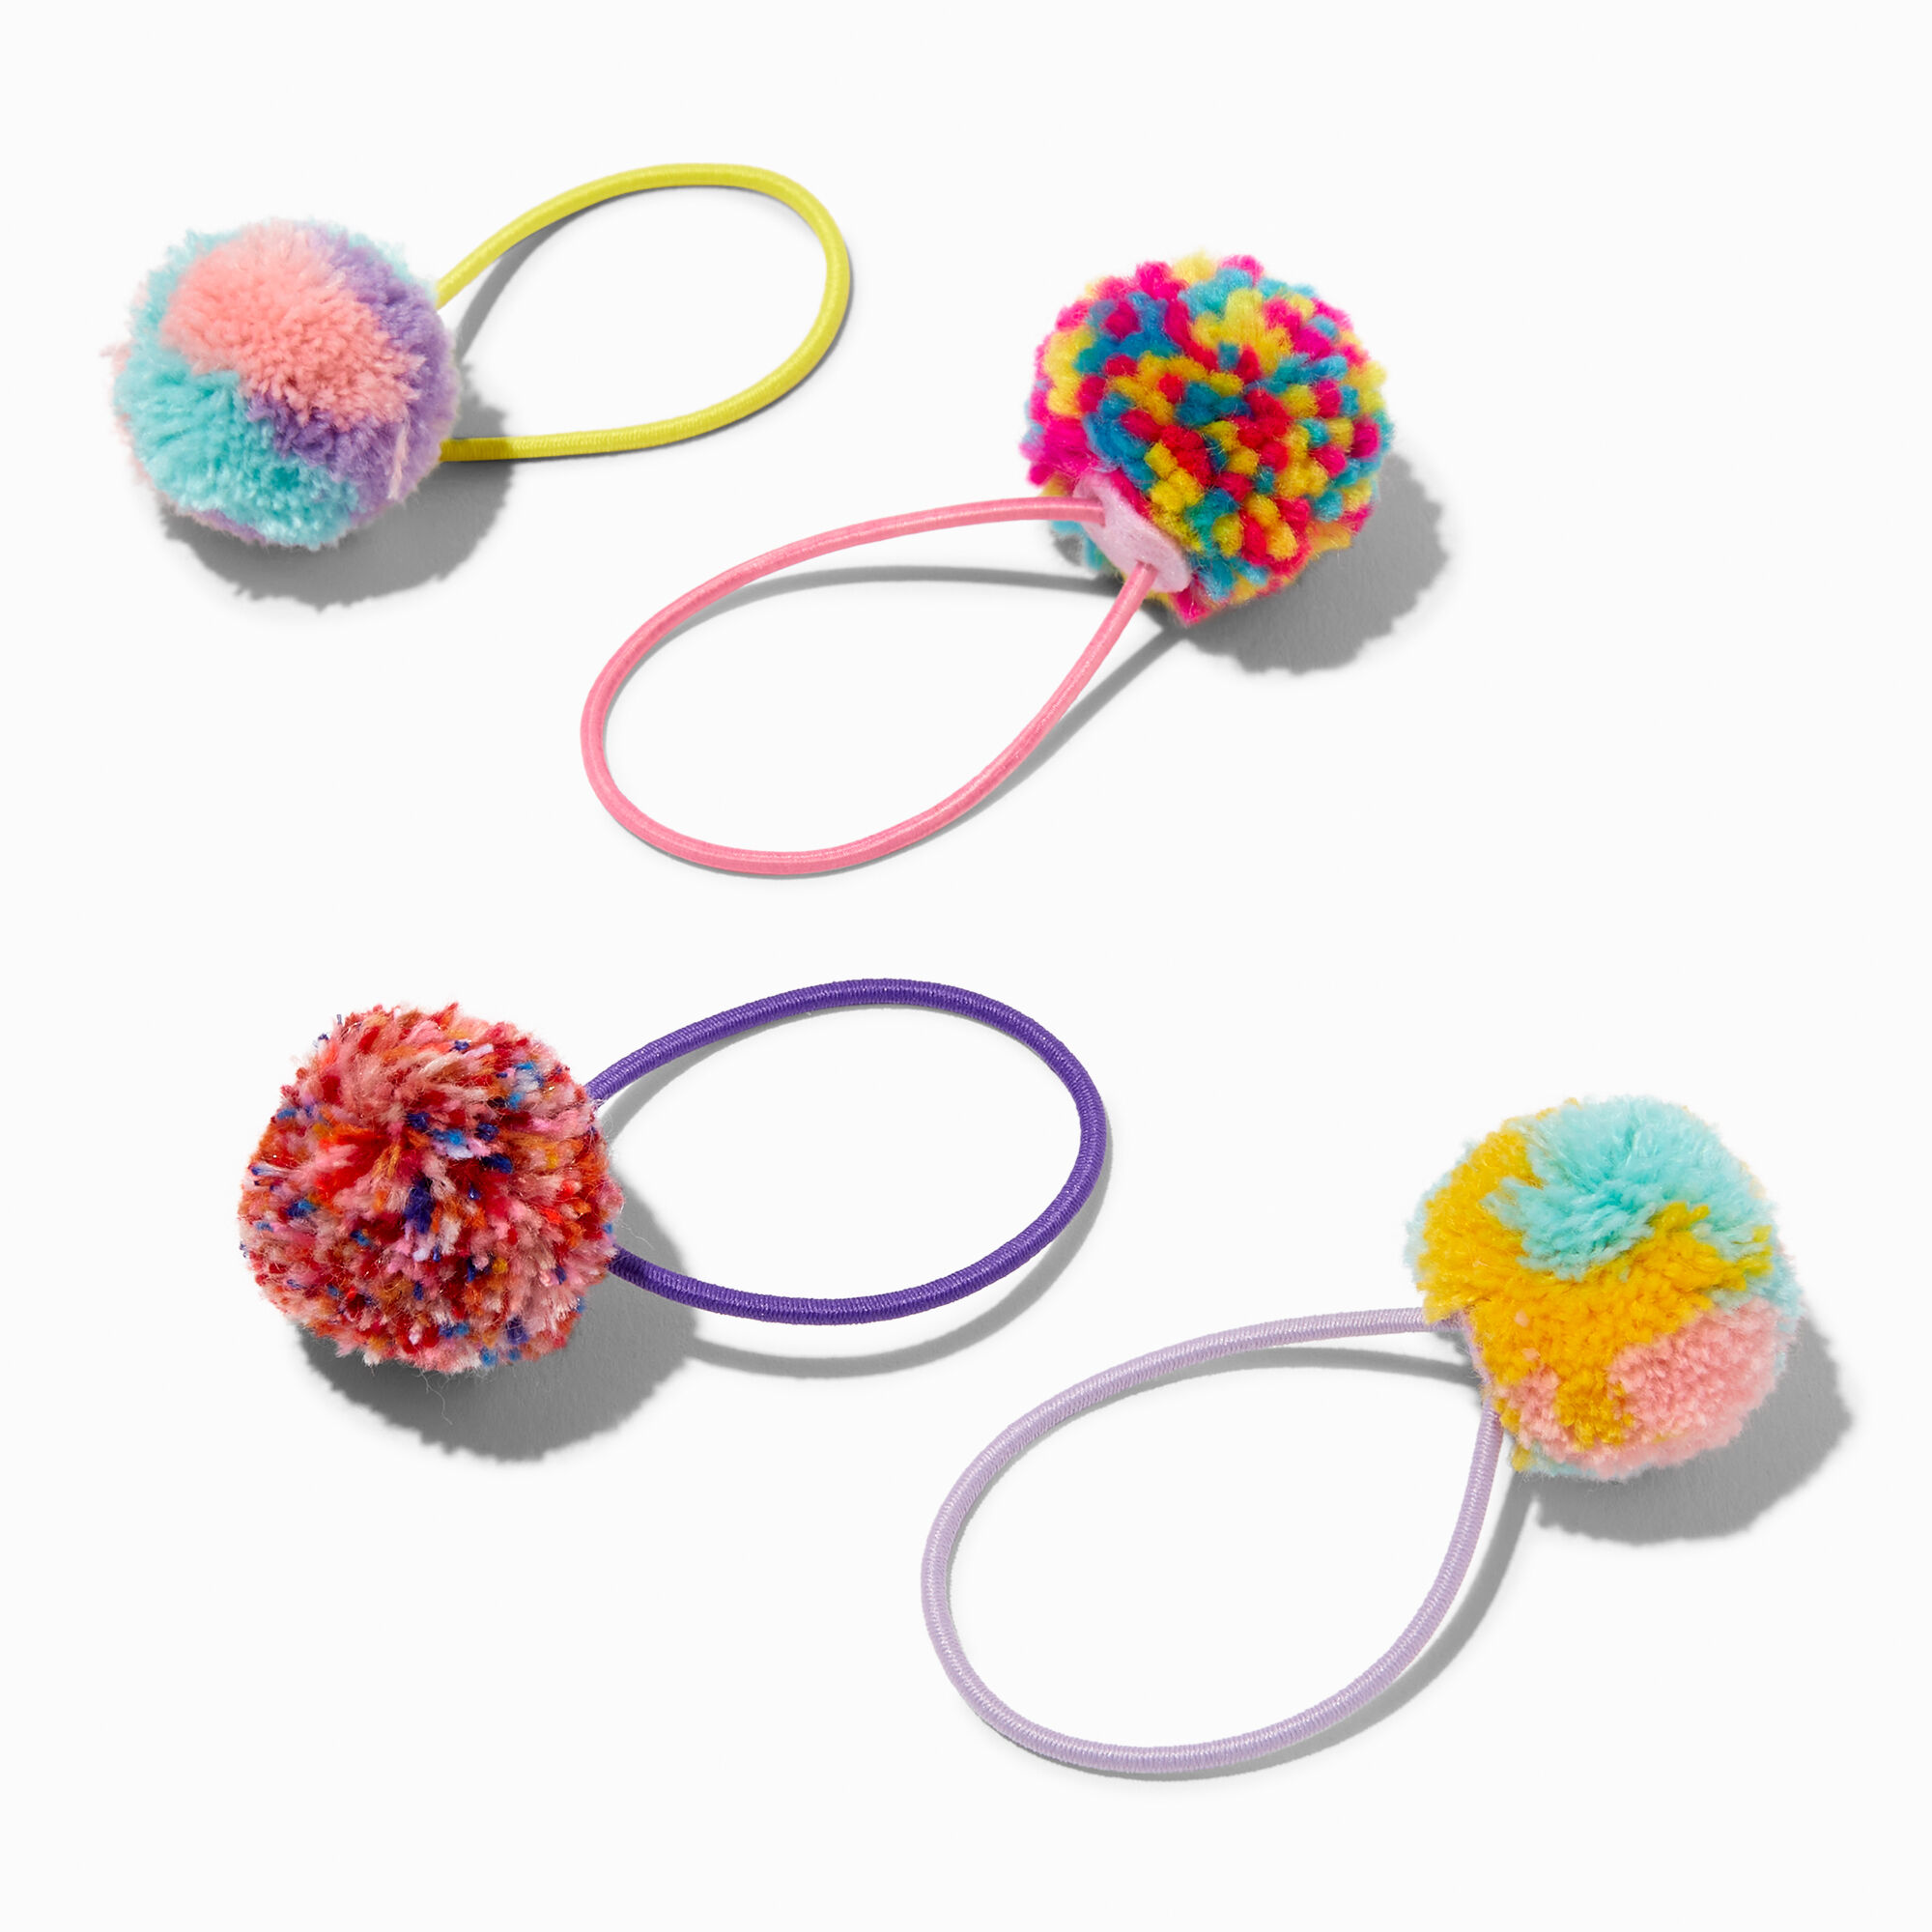 View Claires Mixed Pom Yarn Ball Hair Bobbles 4 Pack Bracelet information